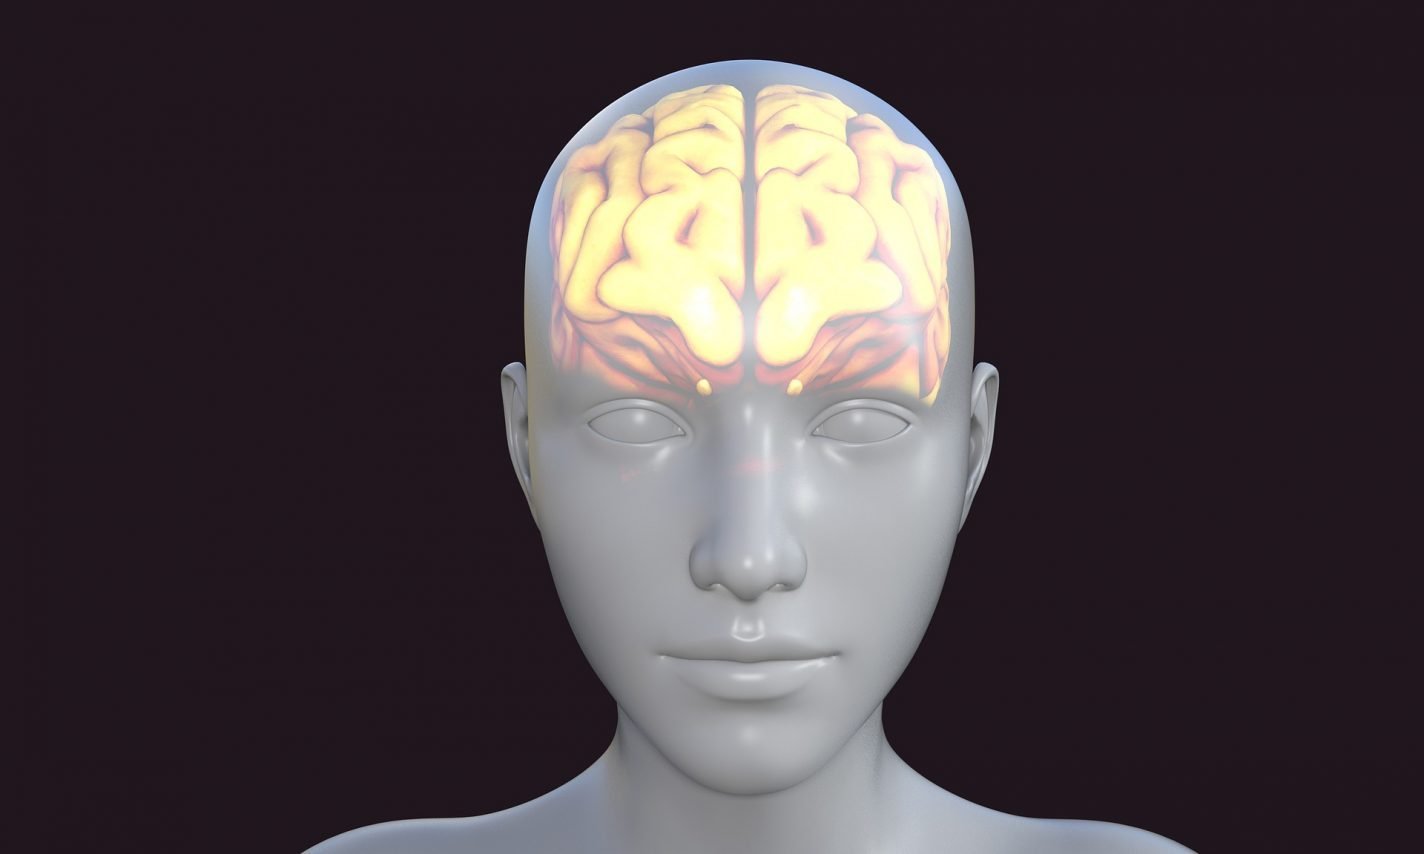 This shows a model of a head with a model of a brain inside